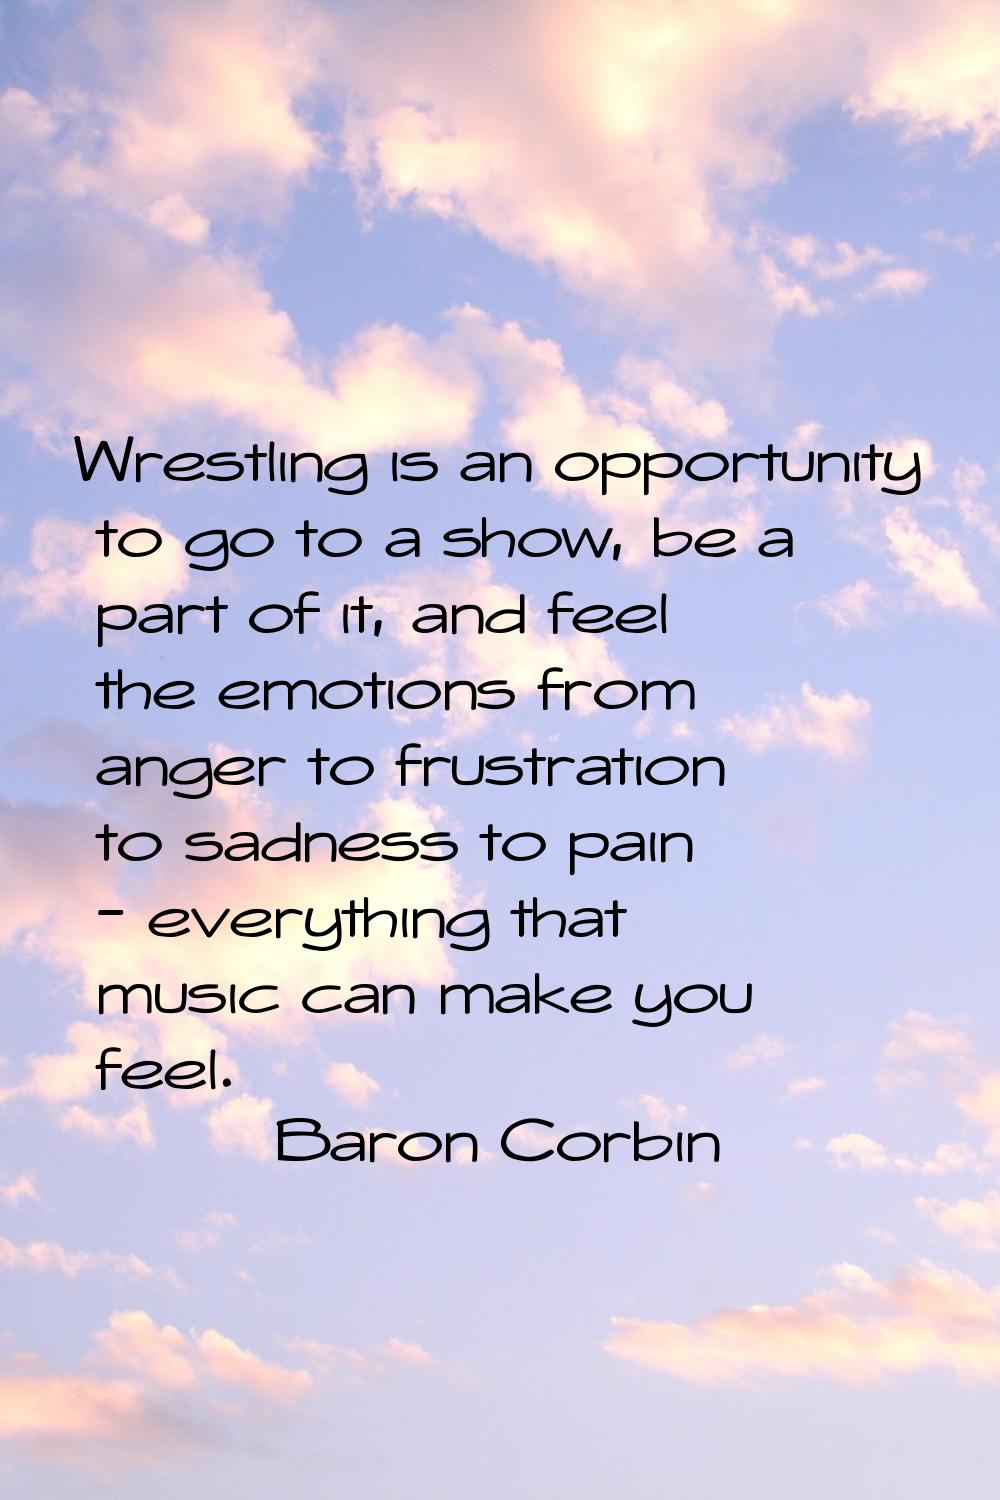 Wrestling is an opportunity to go to a show, be a part of it, and feel the emotions from anger to f